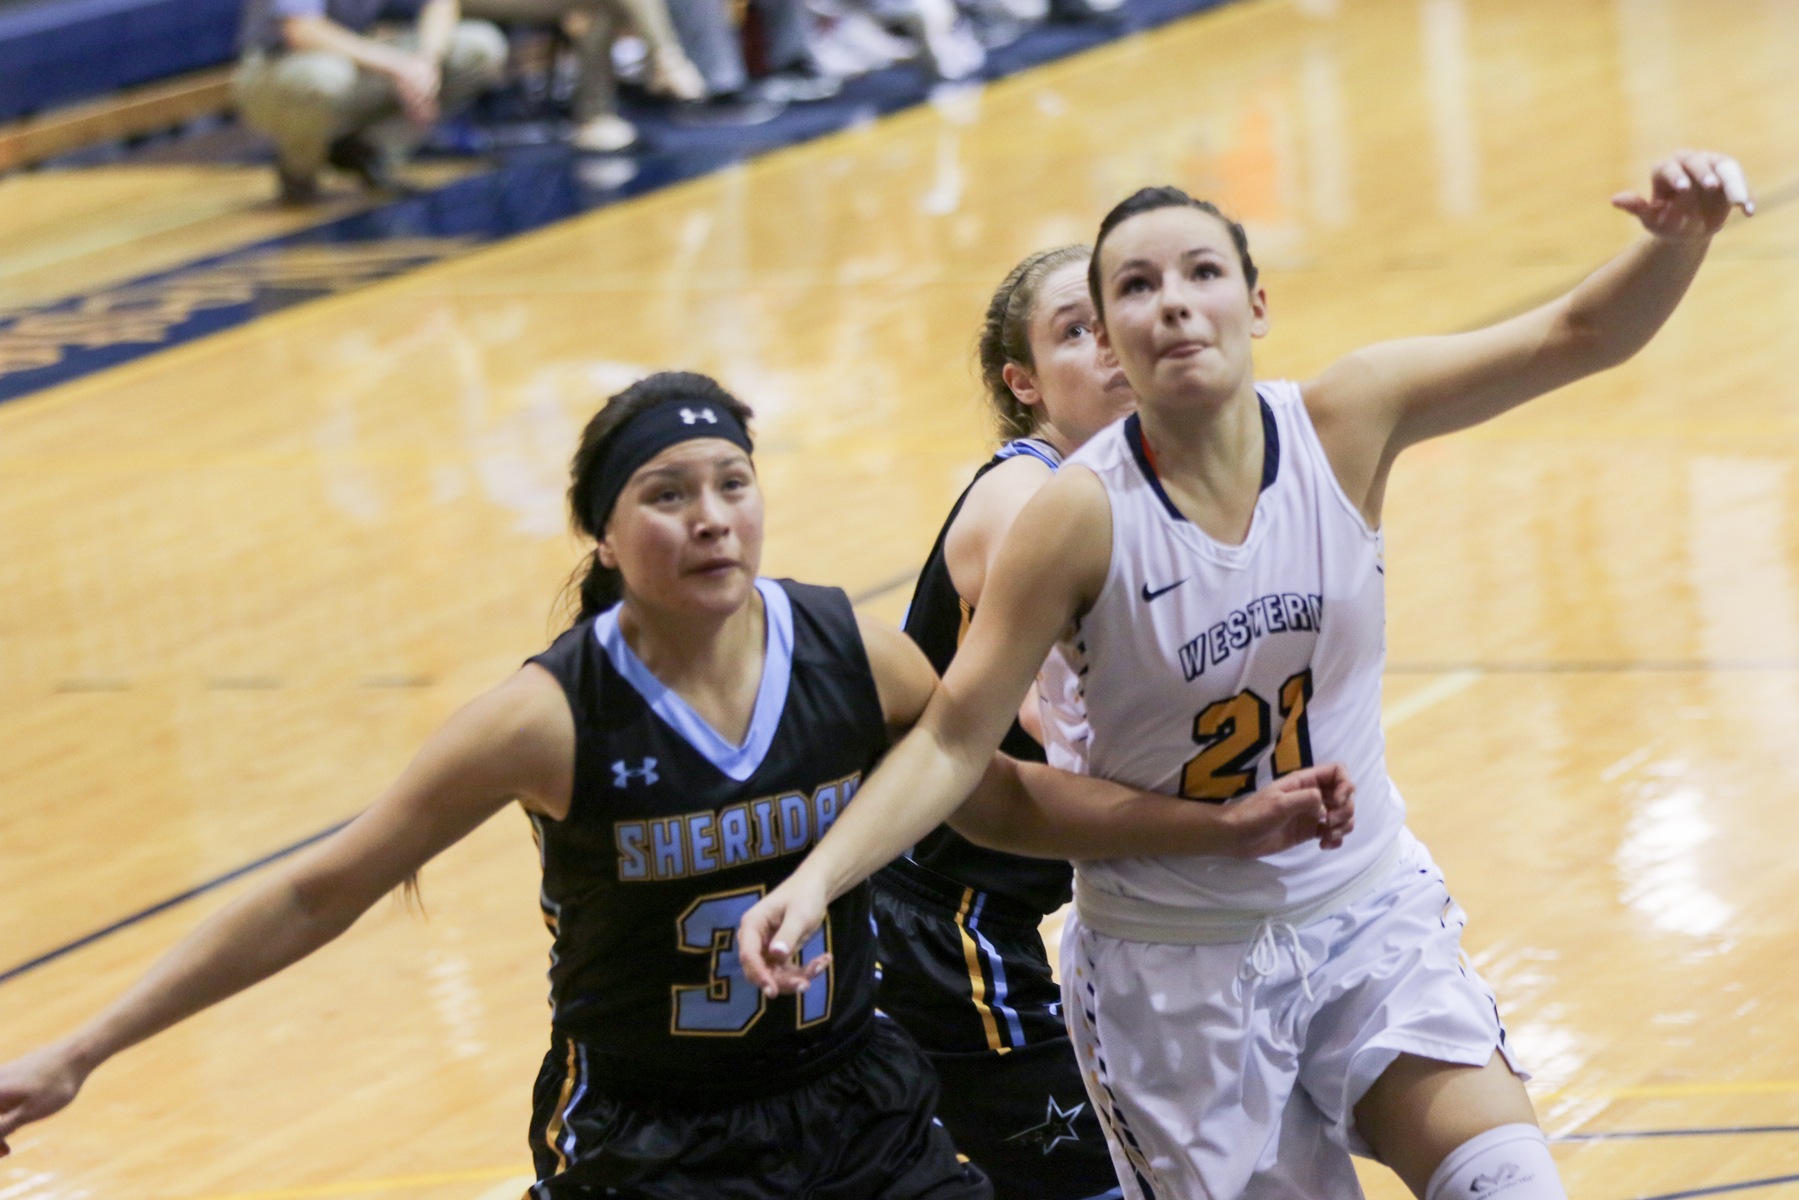 WNCC women move into the semifinals